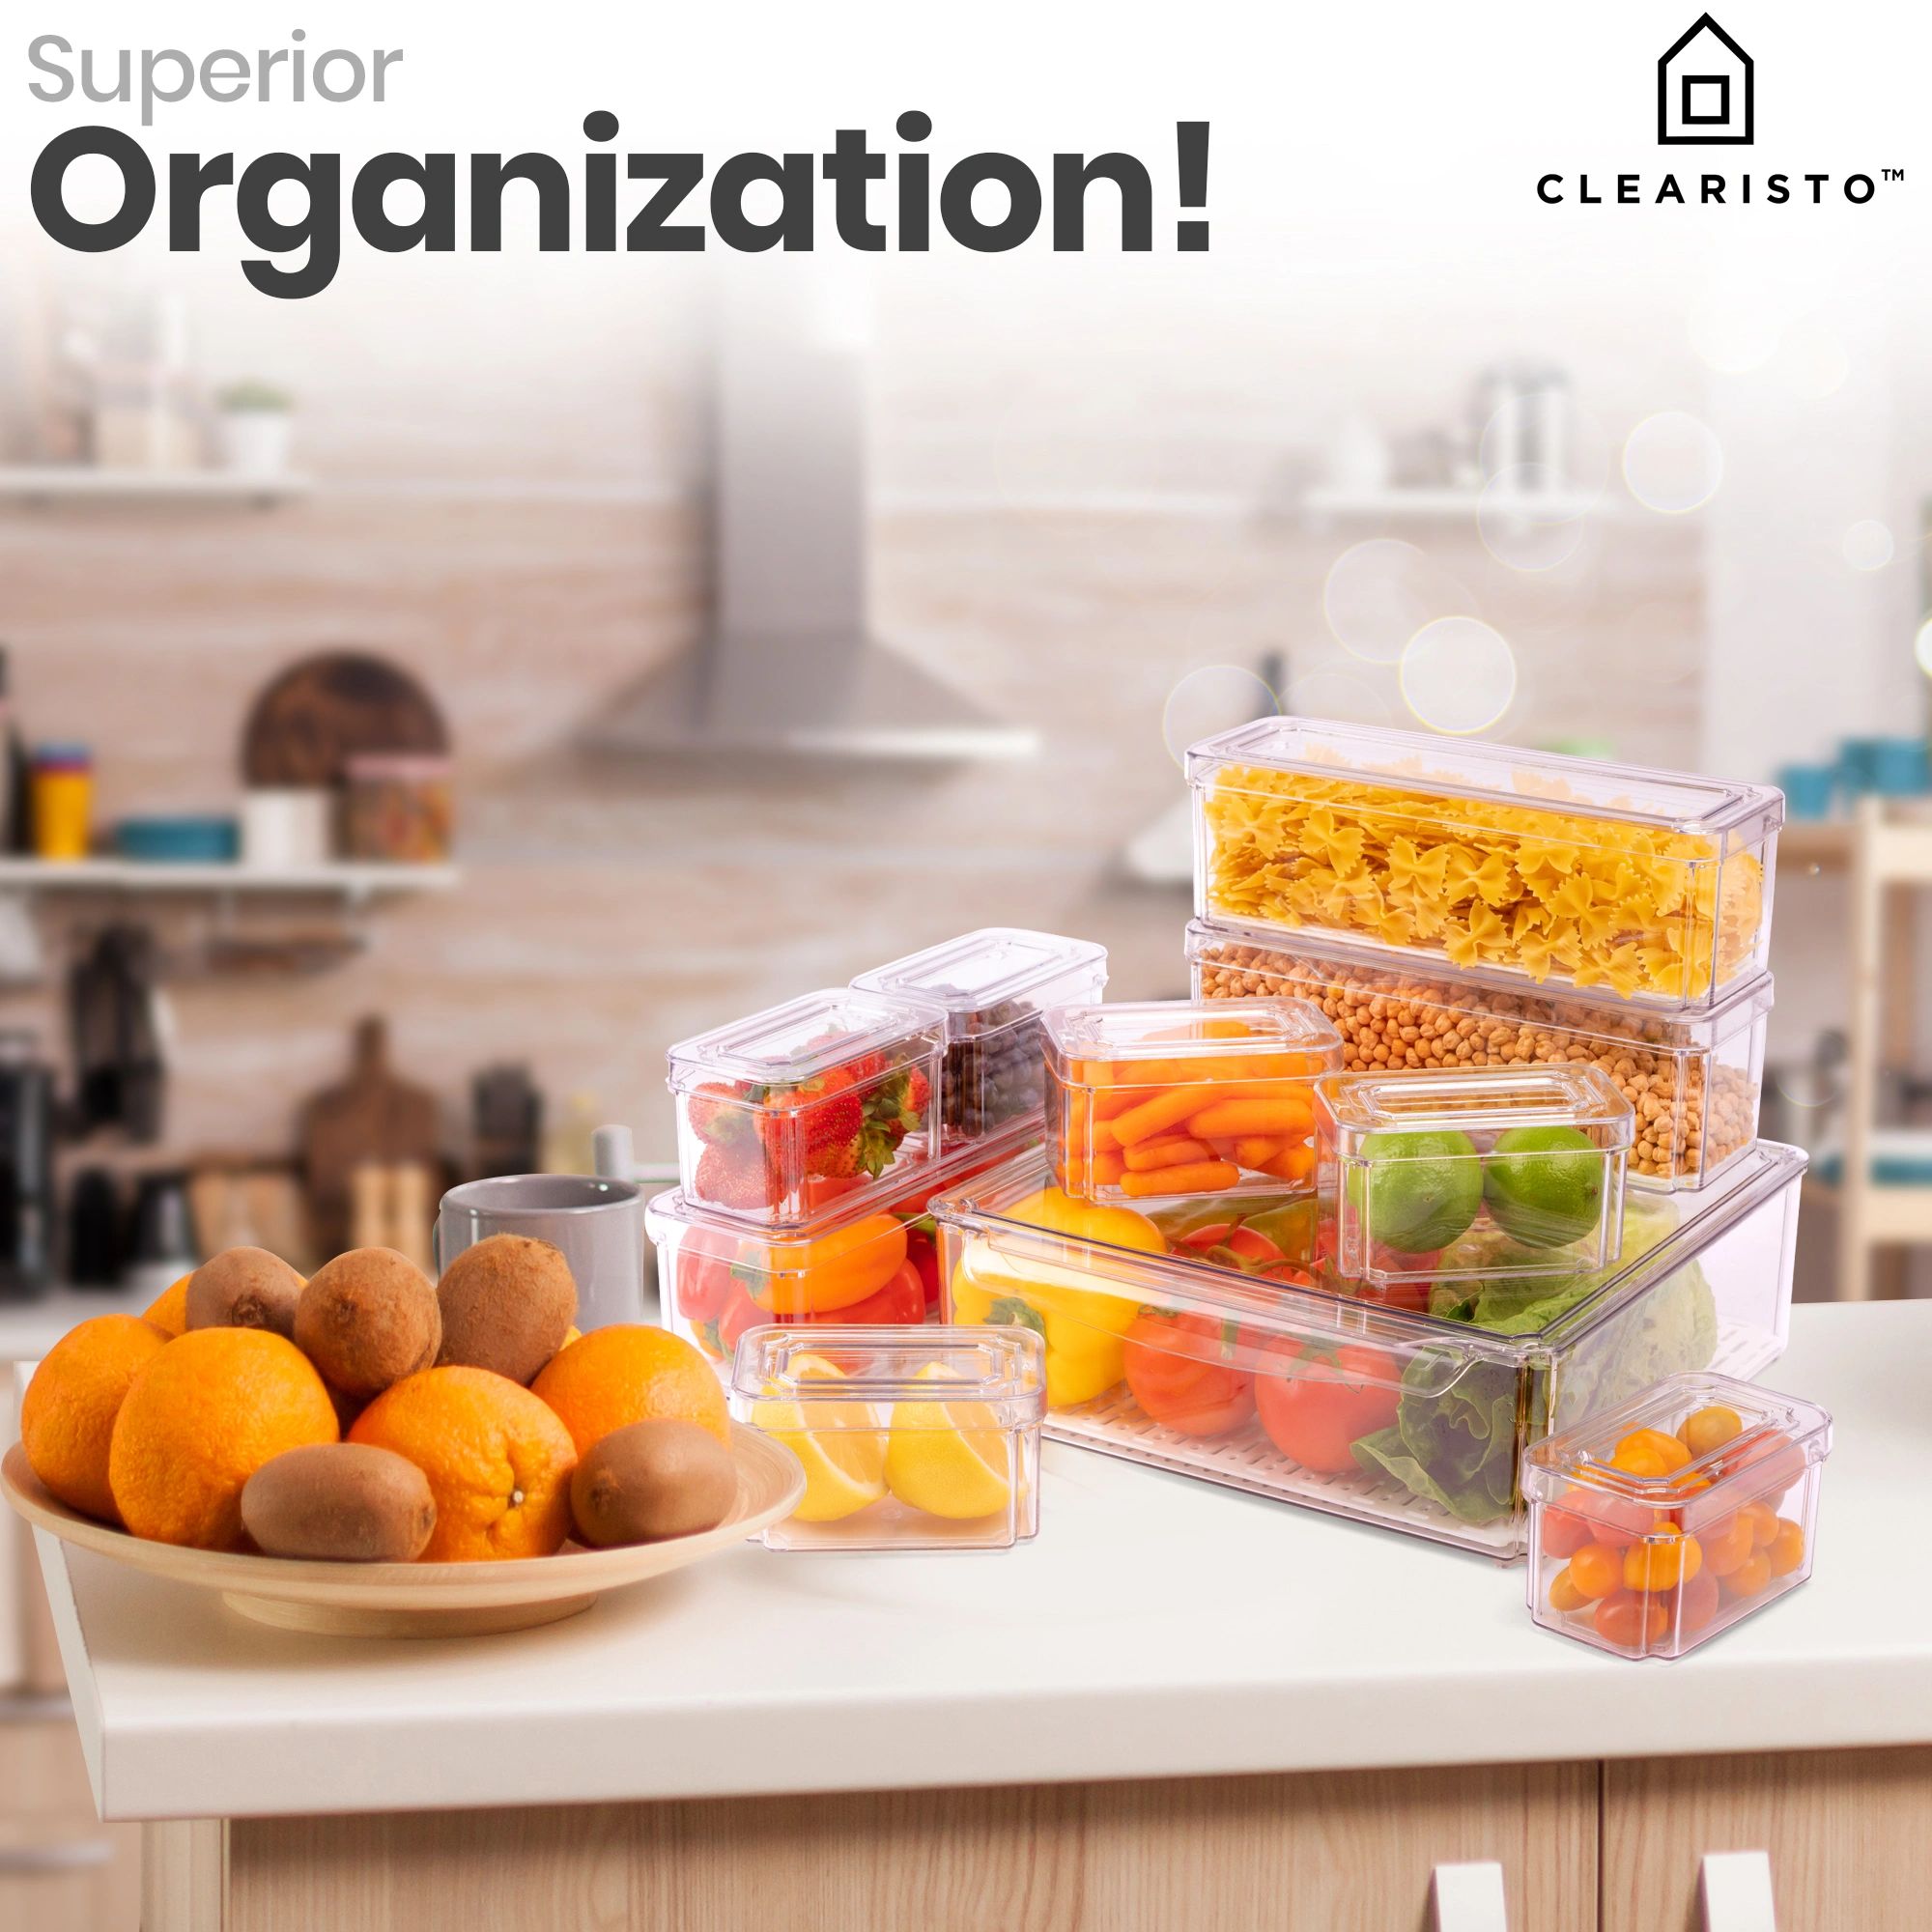  CLEARISTO Set of 10 Fridge Organizer, Stackable Refrigerator  Organizer Bins with Lids, BPA-Free Fridge Organizers and Storage, Clear  Fridge Storage Containers for Produce, Fruit, Vegetable: Home & Kitchen